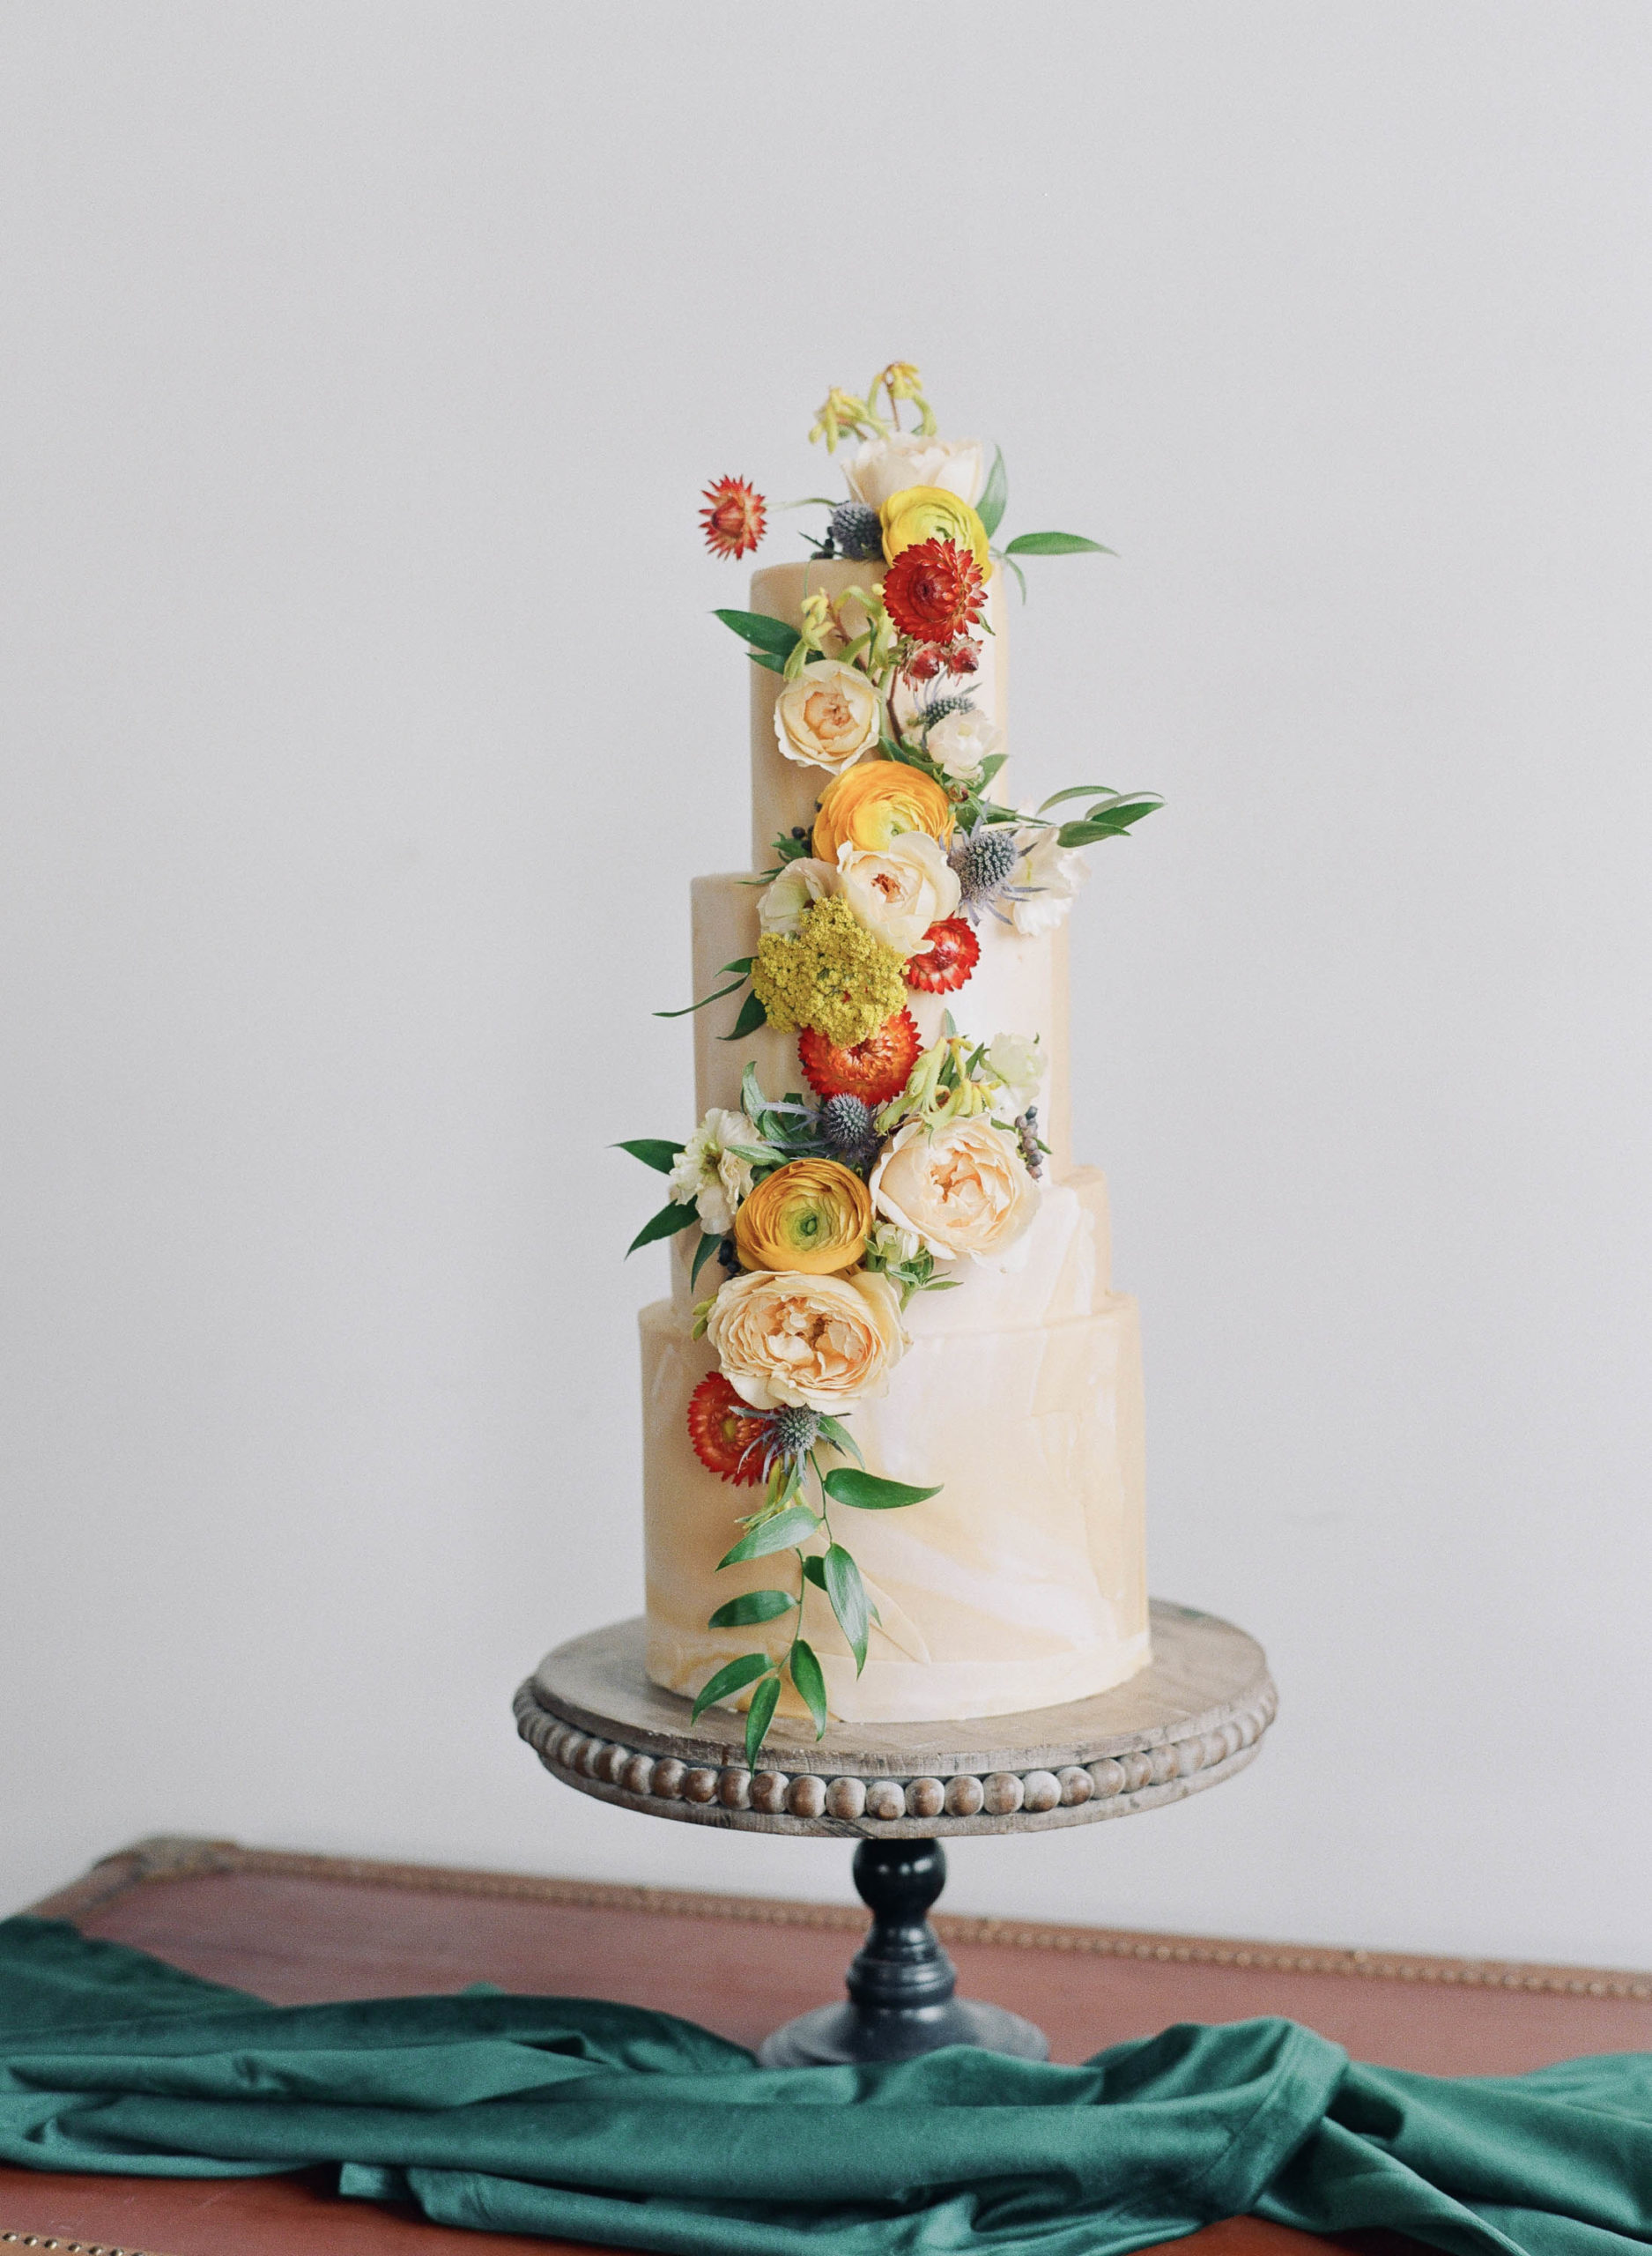 Wedding cake covered in orange, yellow and red flowers